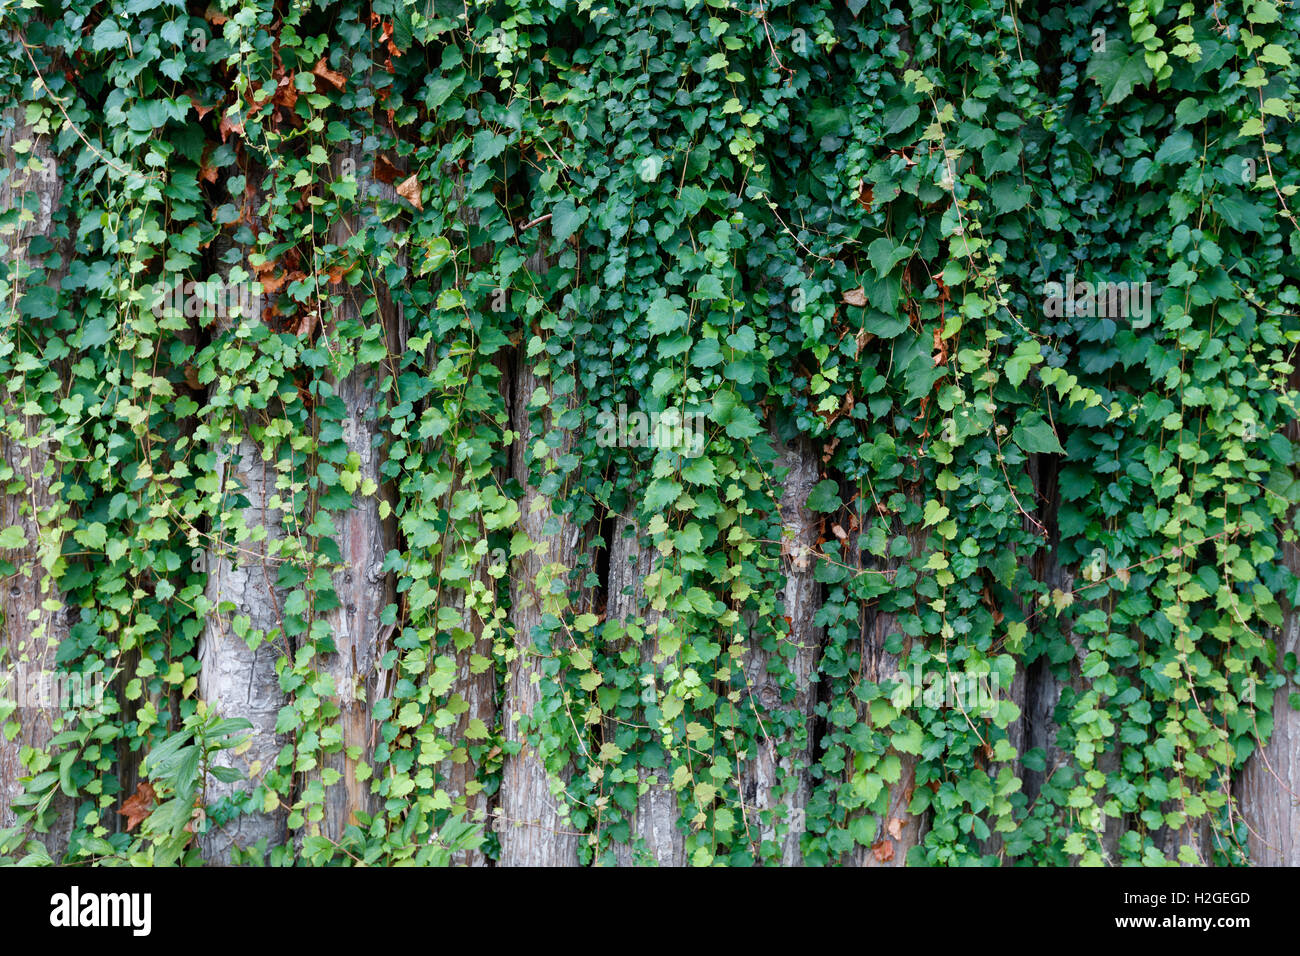 green ivy plant growing on wooden fence Stock Photo